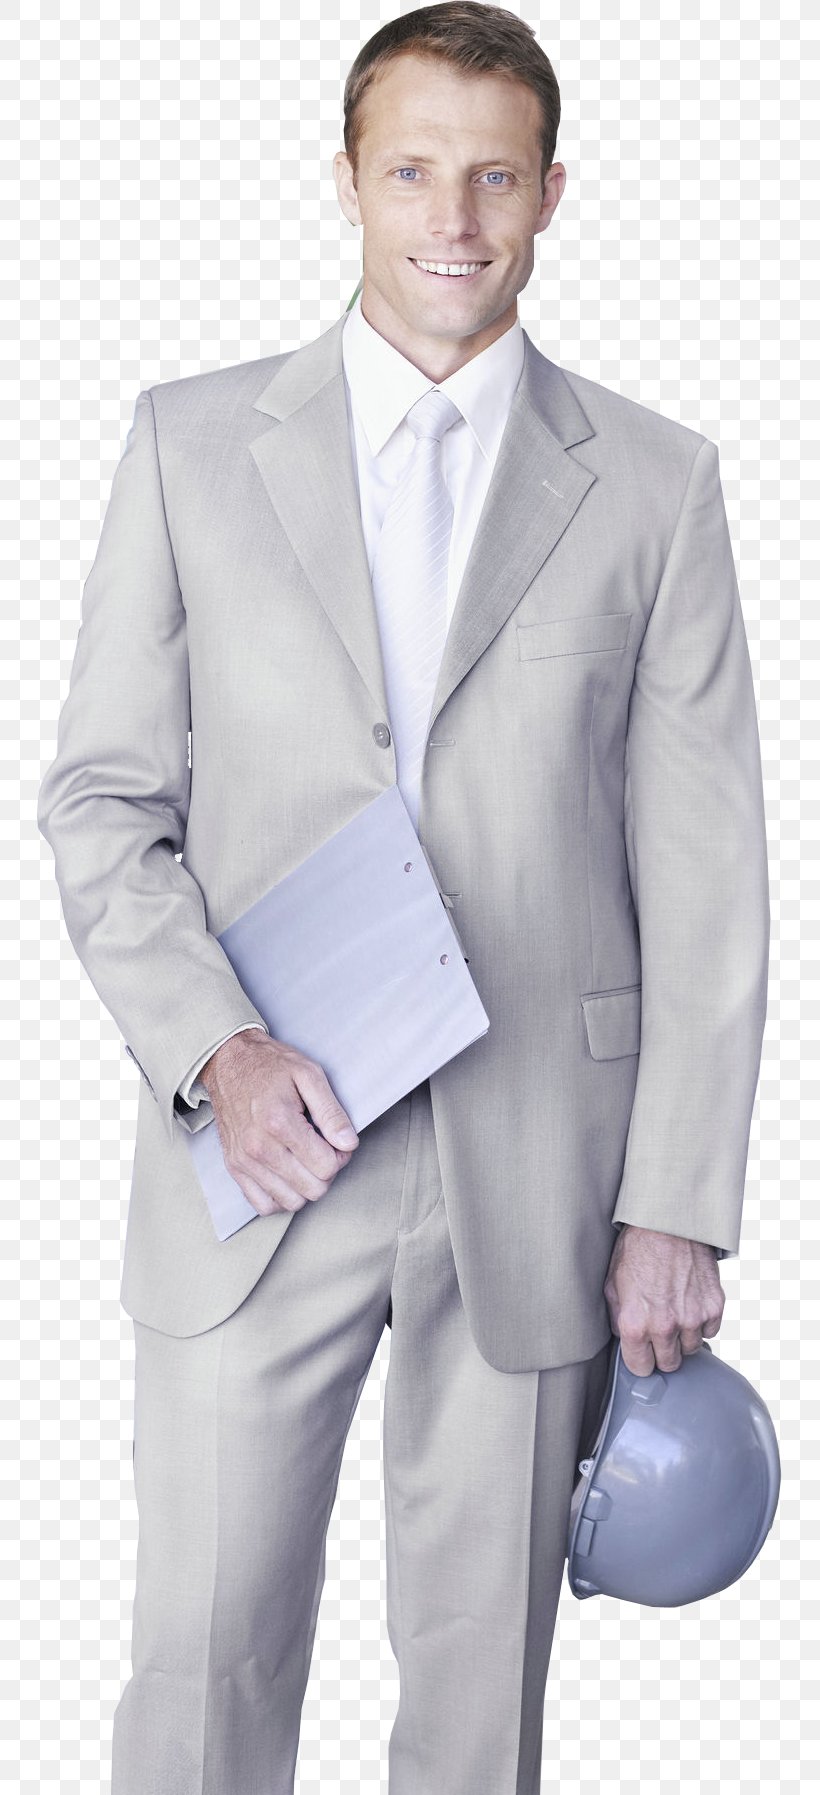 Formal Wear Suit Computer File, PNG, 745x1795px, Formal Wear, Blazer, Business, Business Executive, Businessperson Download Free